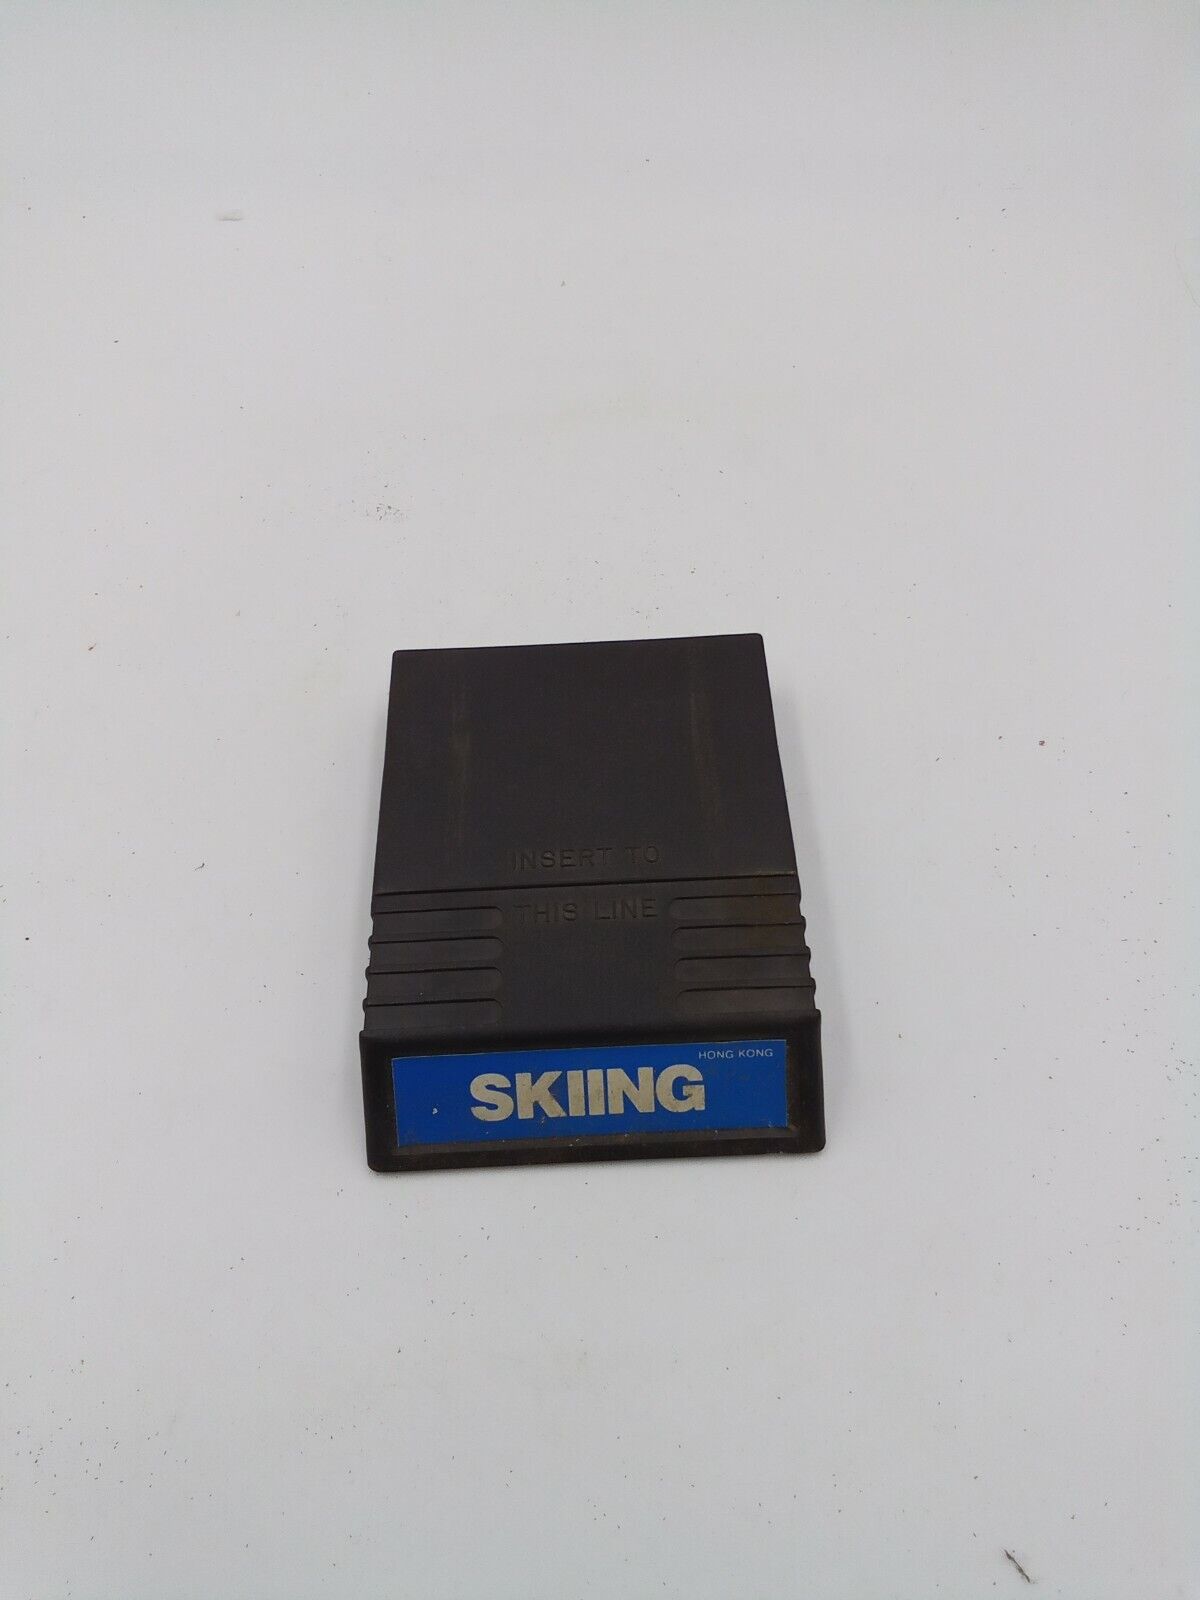 US Ski Team Skiing Intellivision Video Game Cart Only